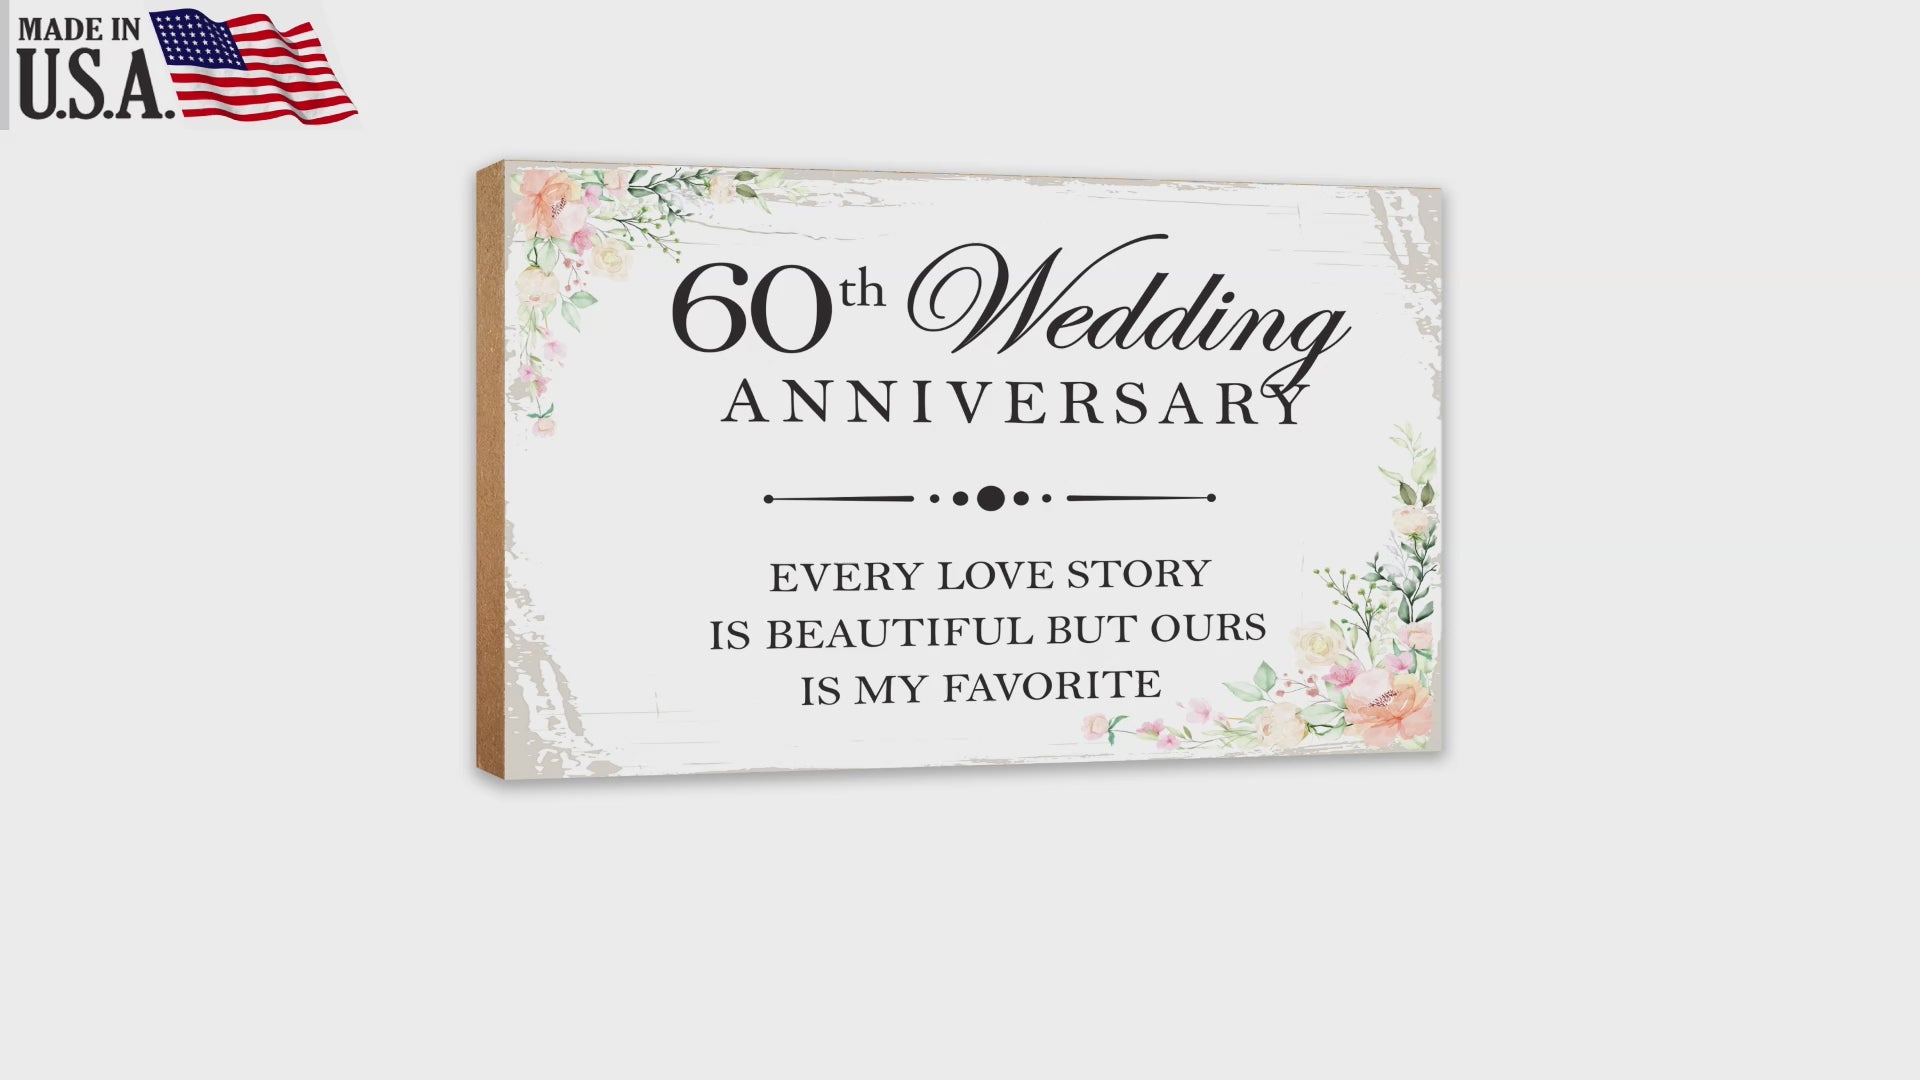 60th Wedding Anniversary Unique Shelf Decor and Tabletop Signs Gift for Couples - Every Love Story